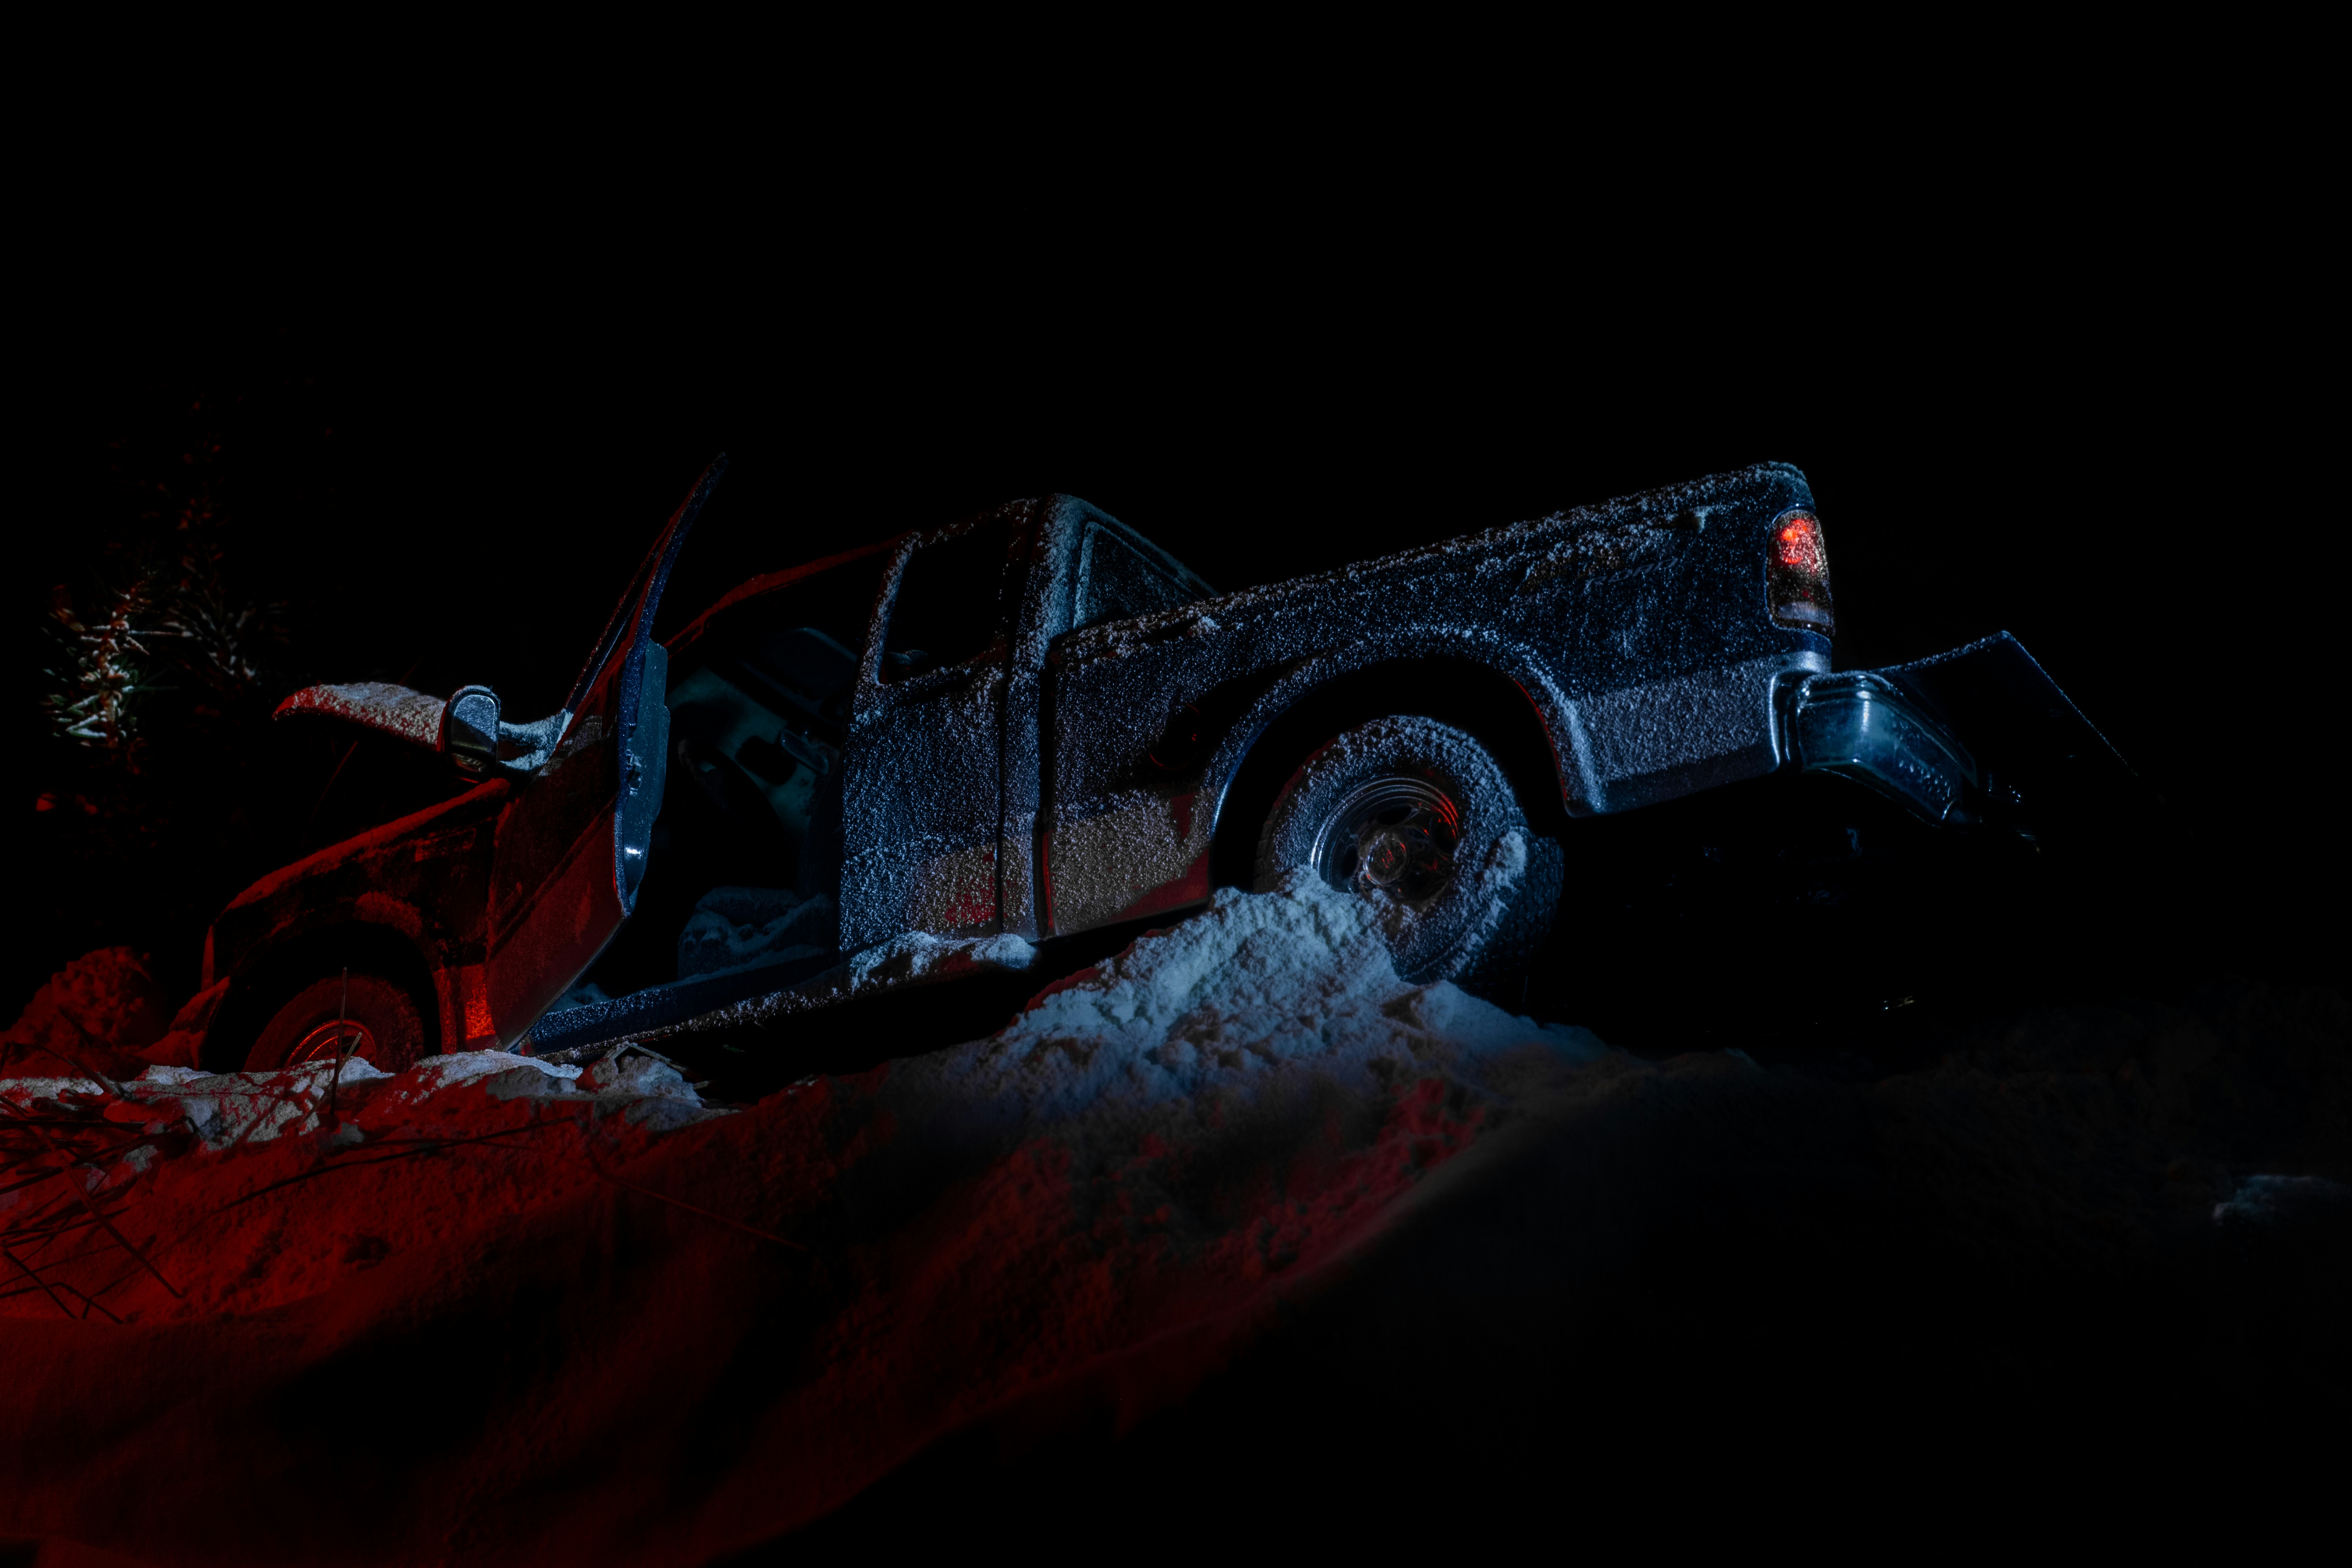 Pickup truck in the ditch, hood up; image by Andrew Petrischev, via Unsplash.com.